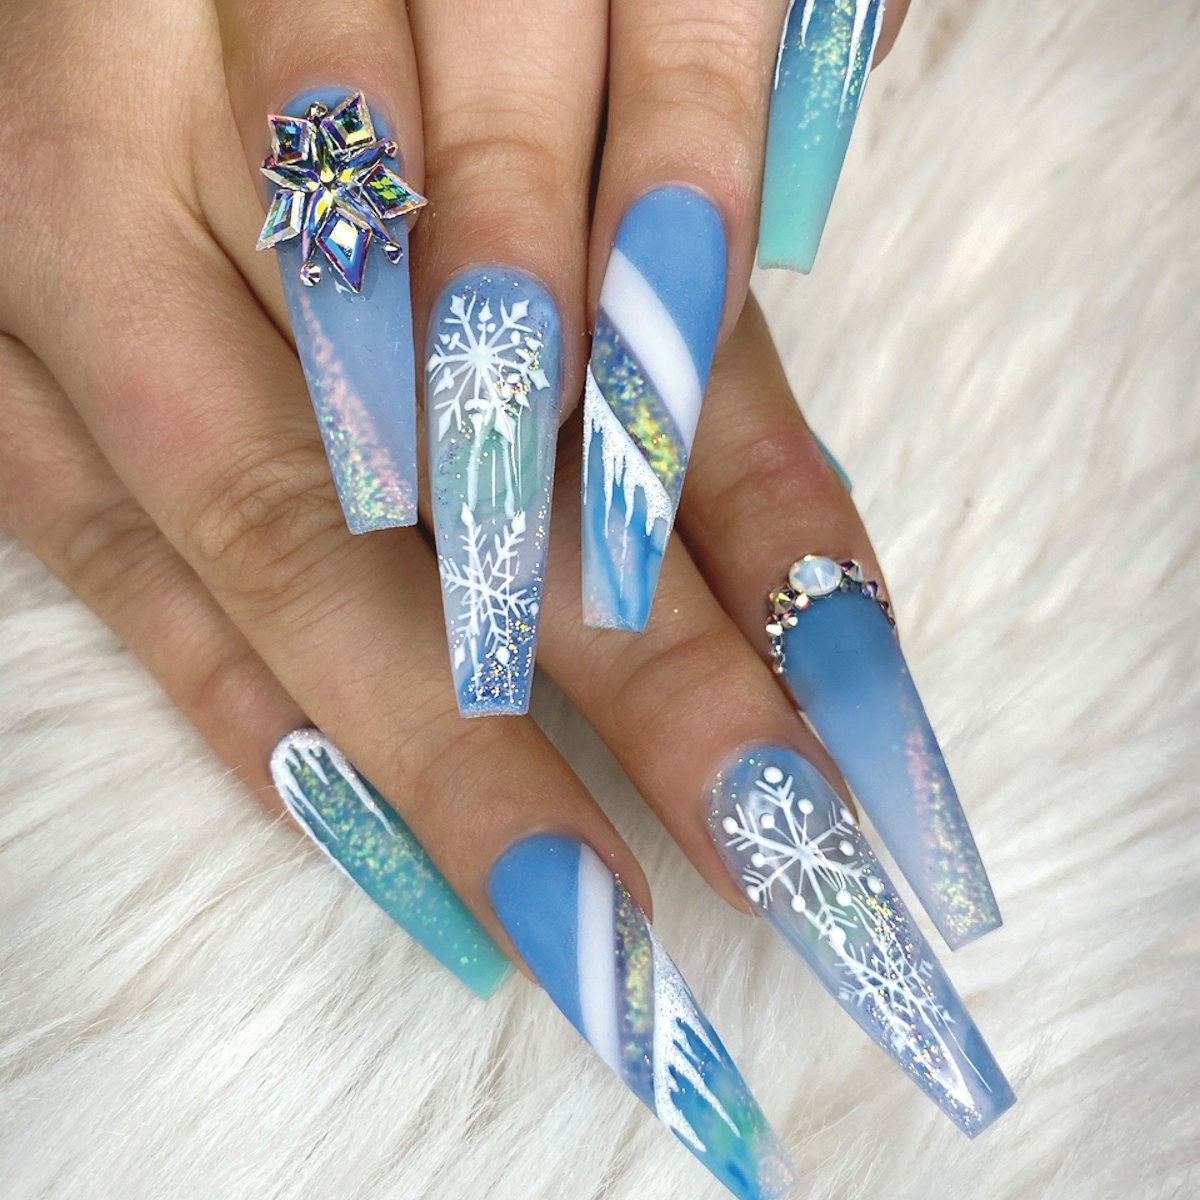 The Best Snow and Icicle-Inspired Nail Art of 2021 | Nailpro